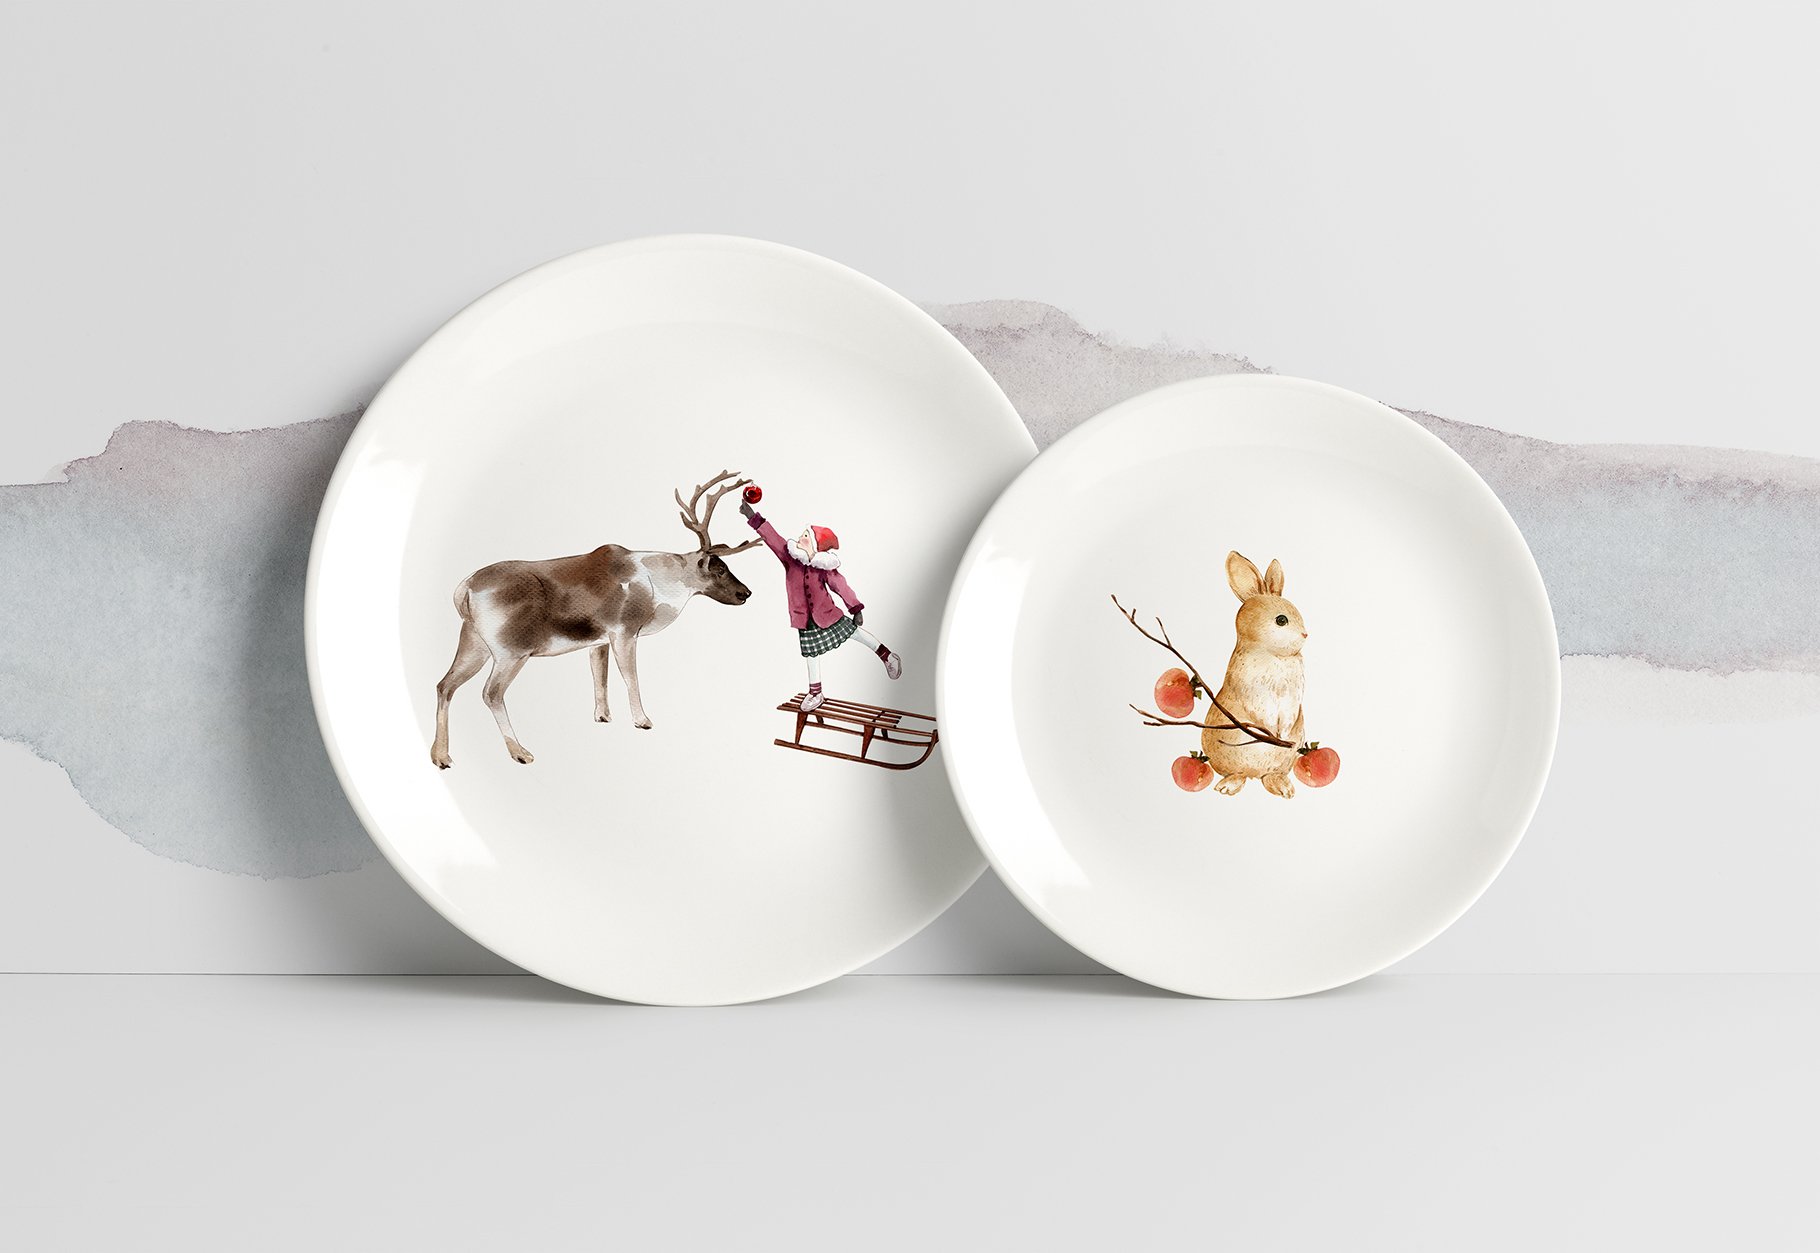 So stylish plates with the winter animal compositions.